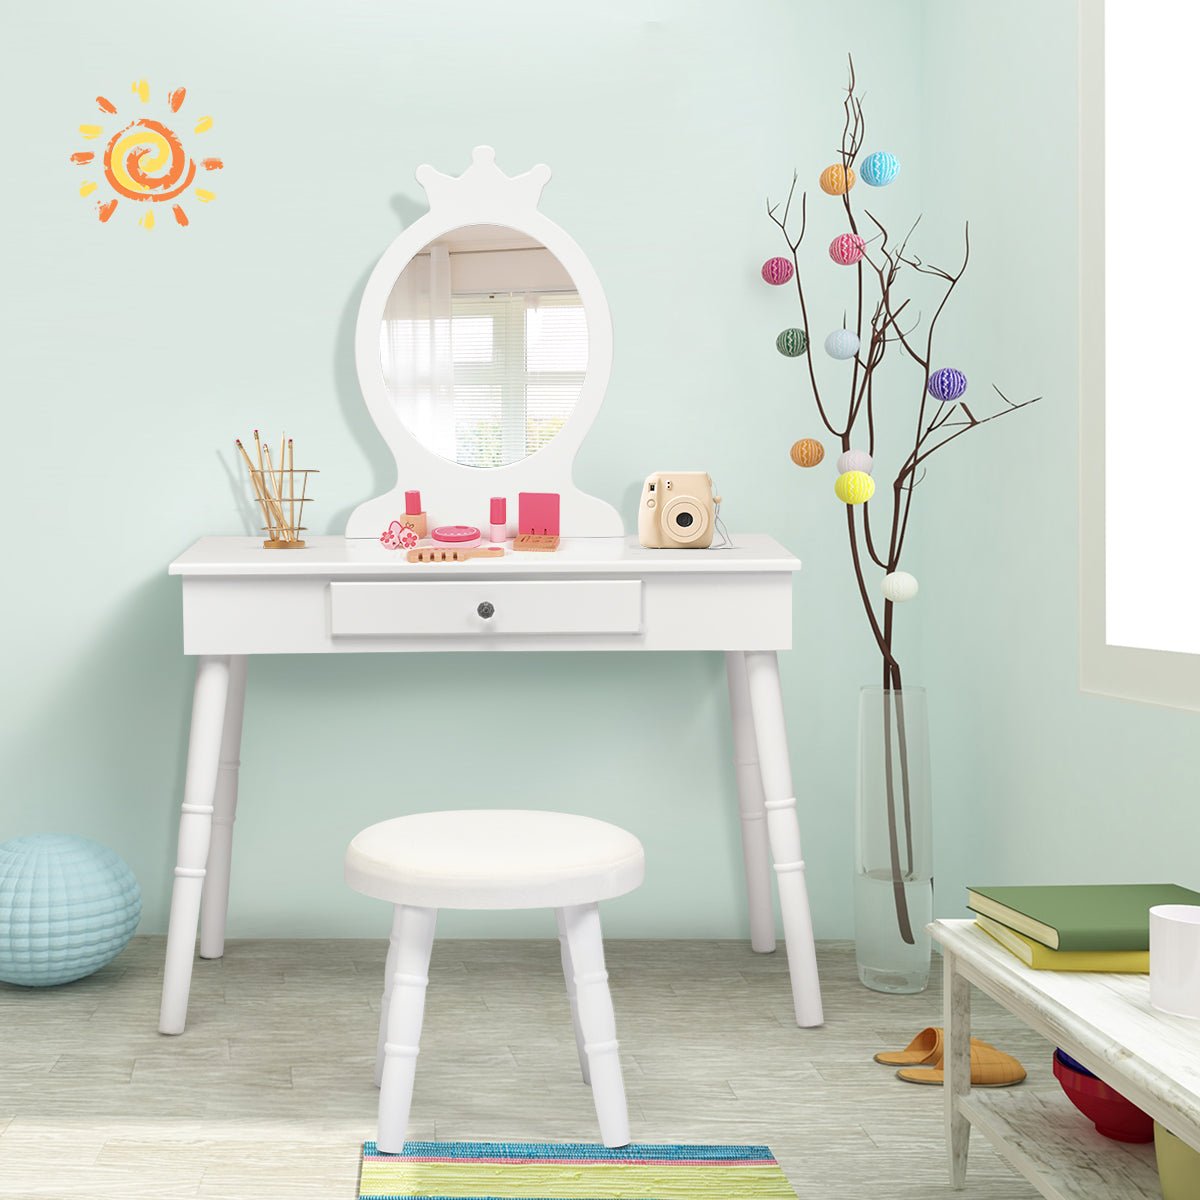 Enchanting Vanity Makeup Table Set for Kids - Real Mirror Included